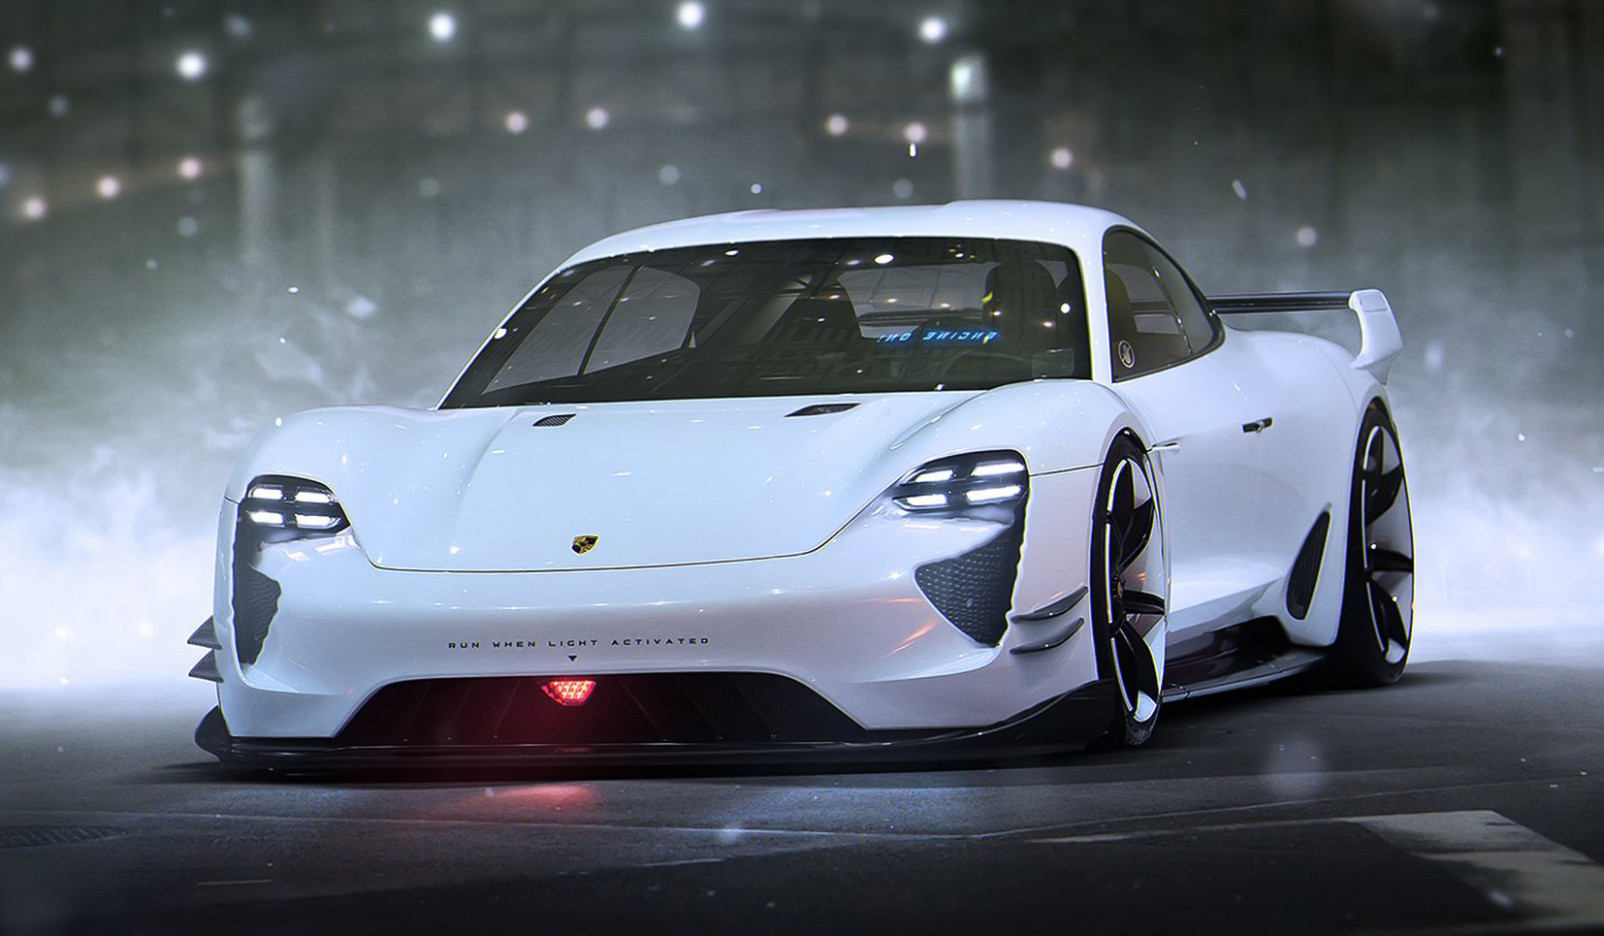 Porsche Expects Mission E All Electric Sedan To Be As Popular As Porsche’s Mission E